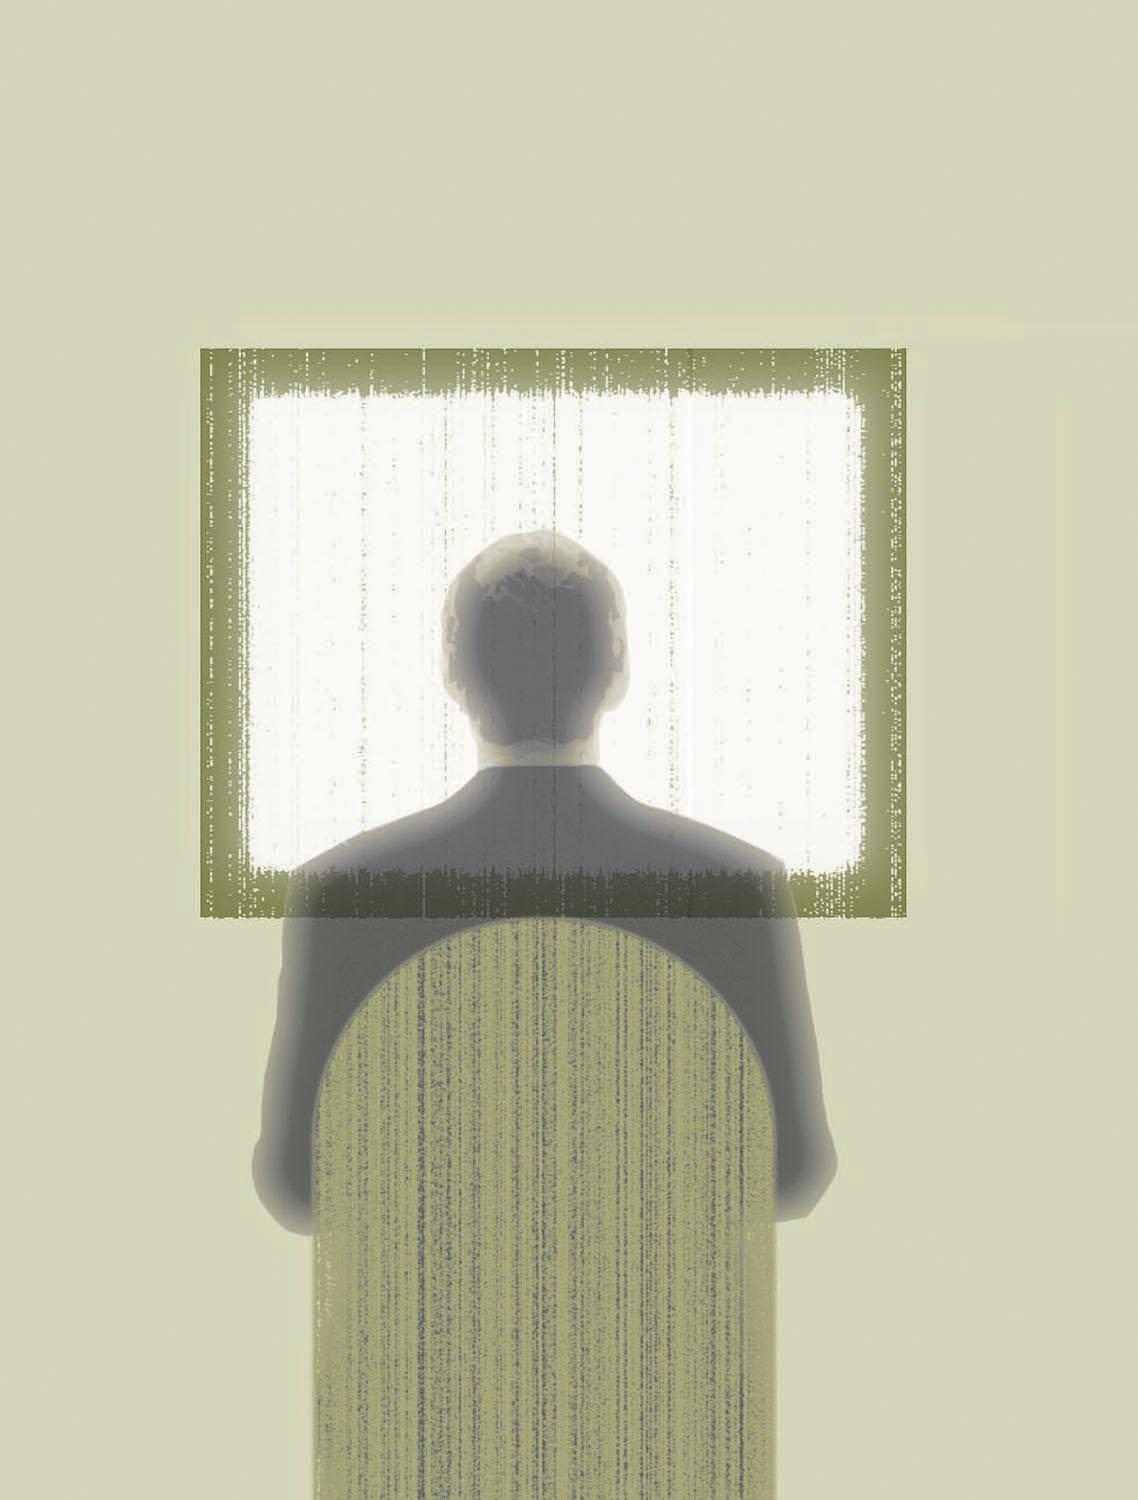 Hugo Espinoza color illustration of of a man seated in front of a large screen. Chicago Tribune 2006